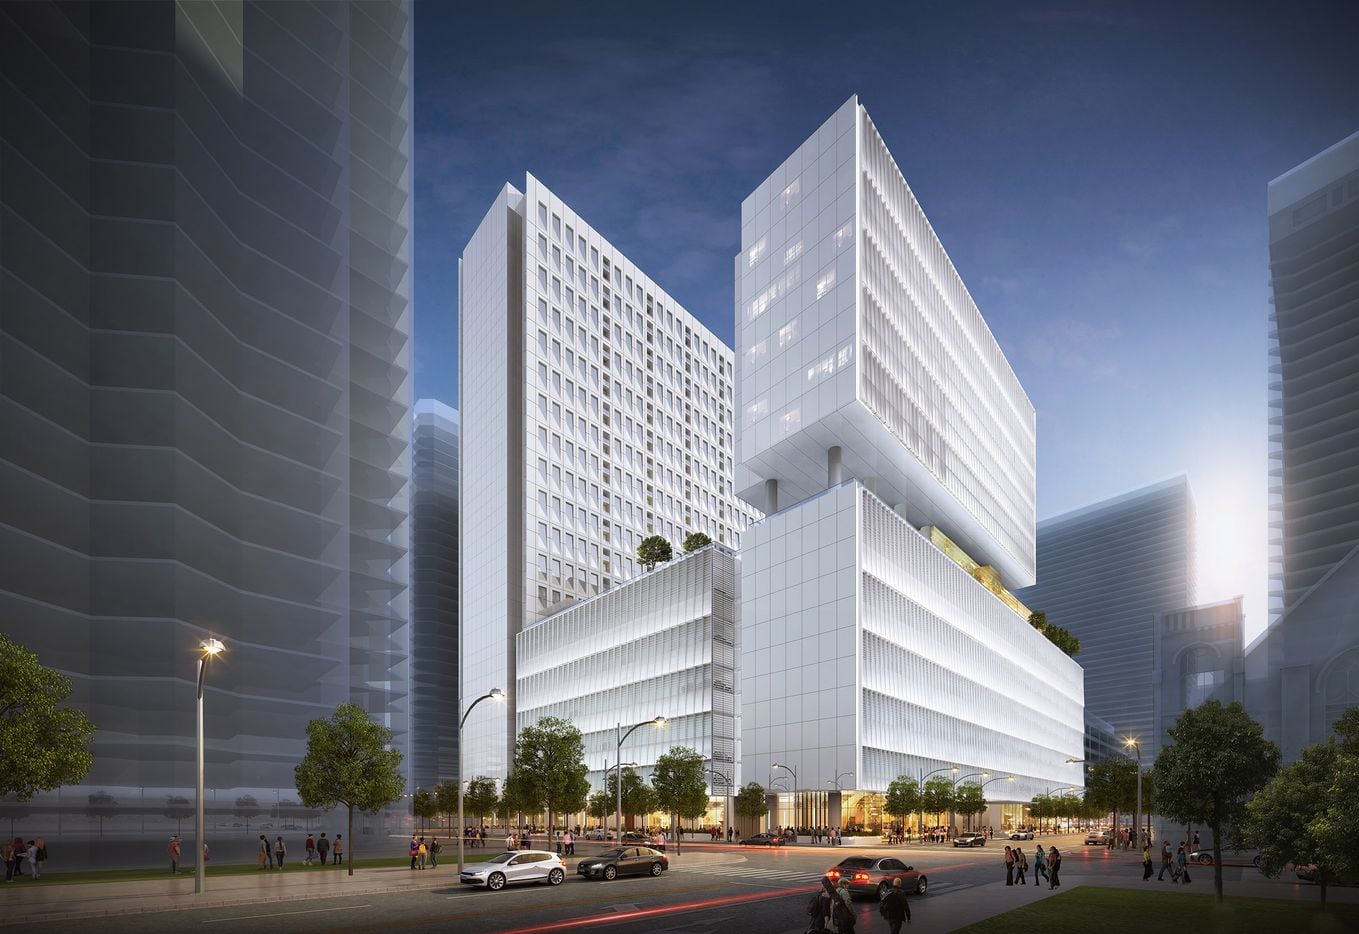 The new high-rise mixed-use project across the street will have retail, more than 2,000...